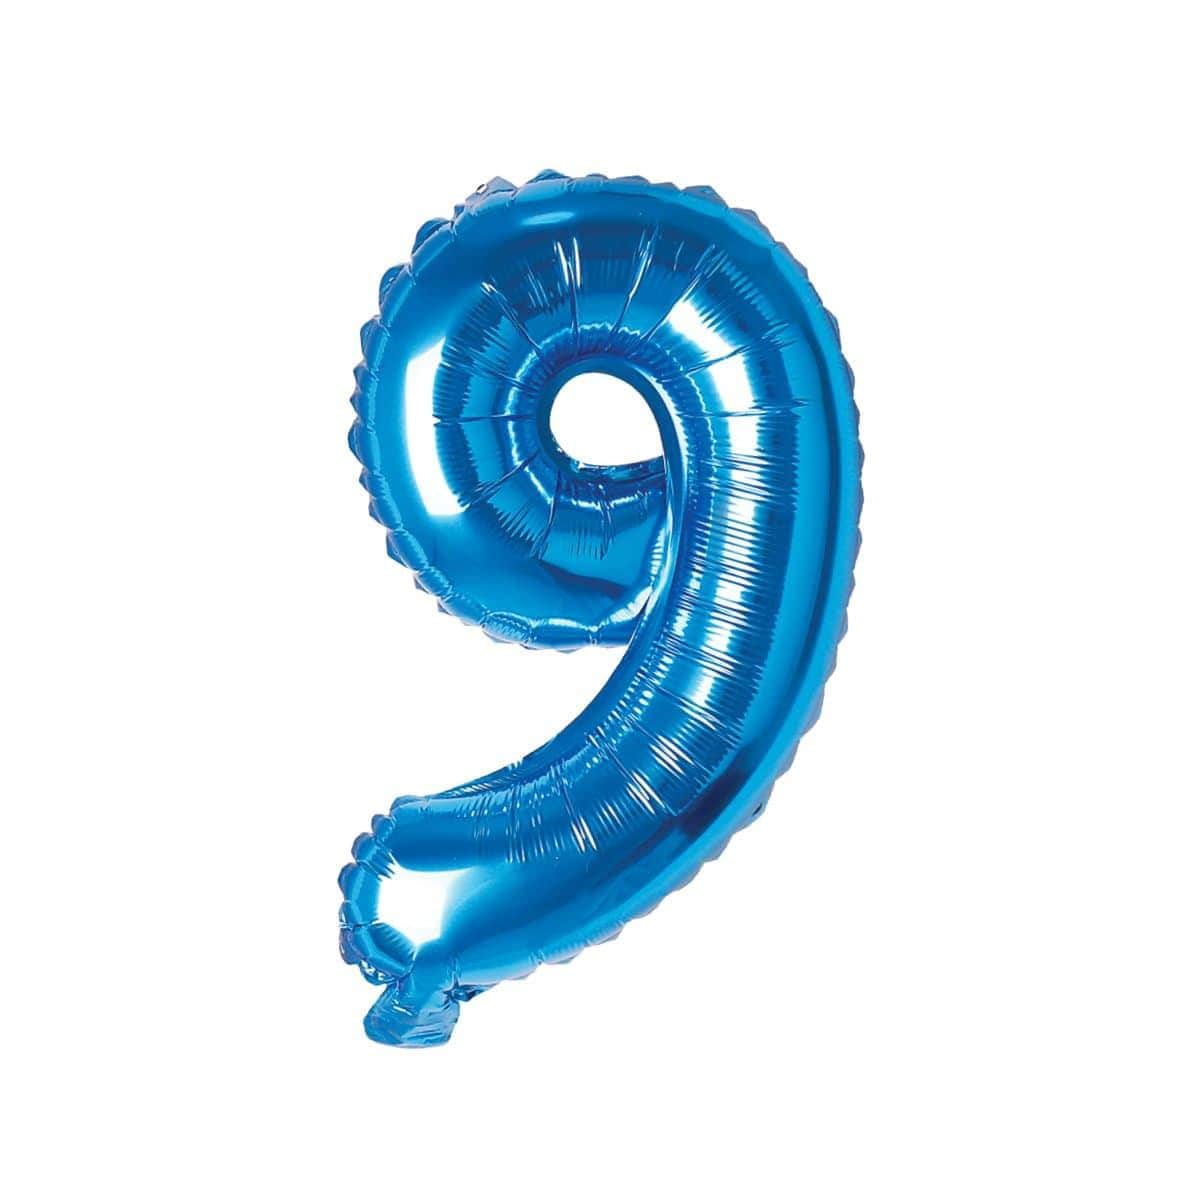 Buy Balloons Blue Number 9 Foil Balloon, 16 Inches sold at Party Expert